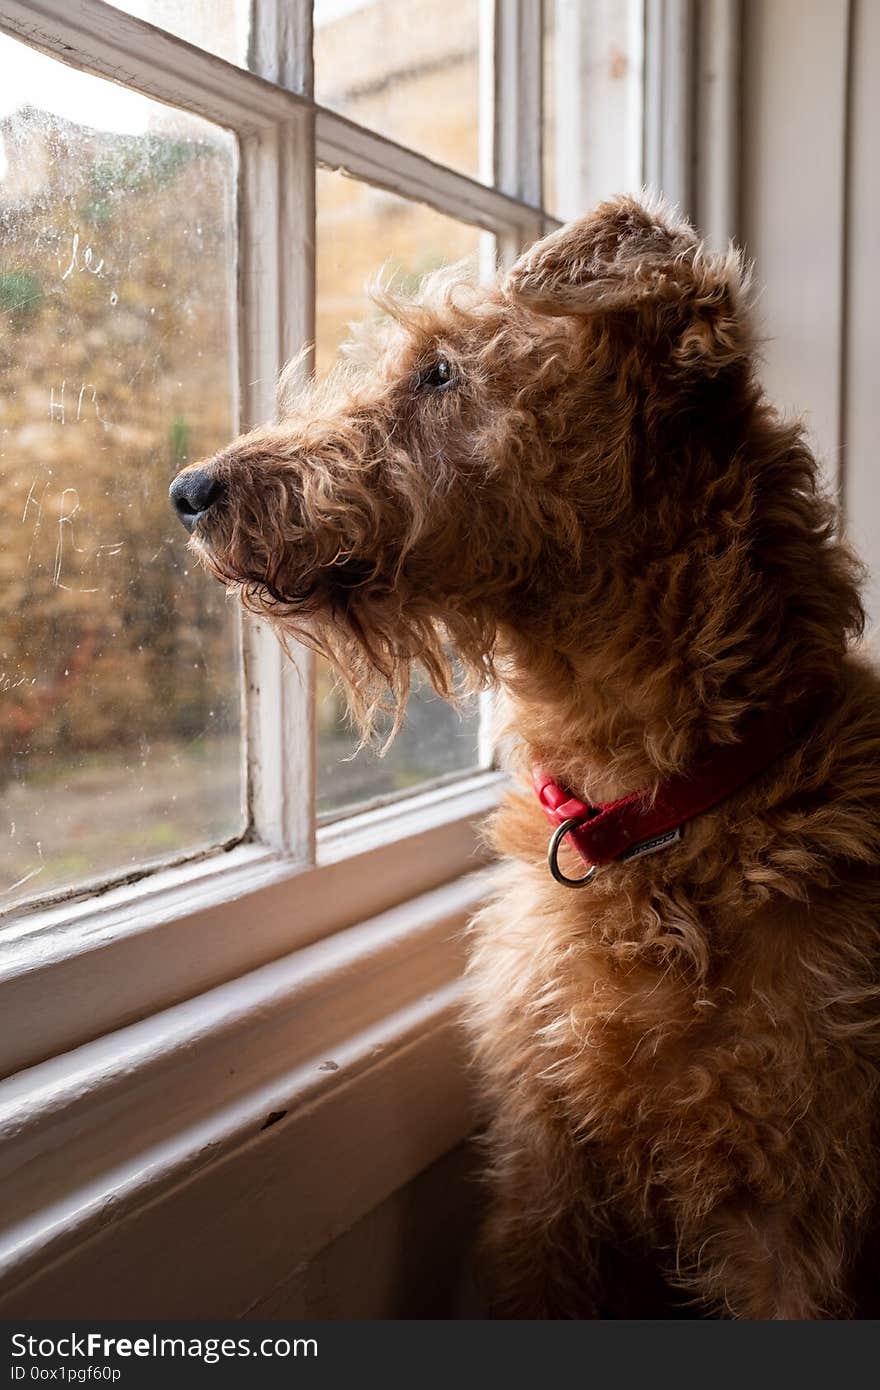 A Irish terrier sitting in a window looking out wishfully, the sun catching the side profile of the dog